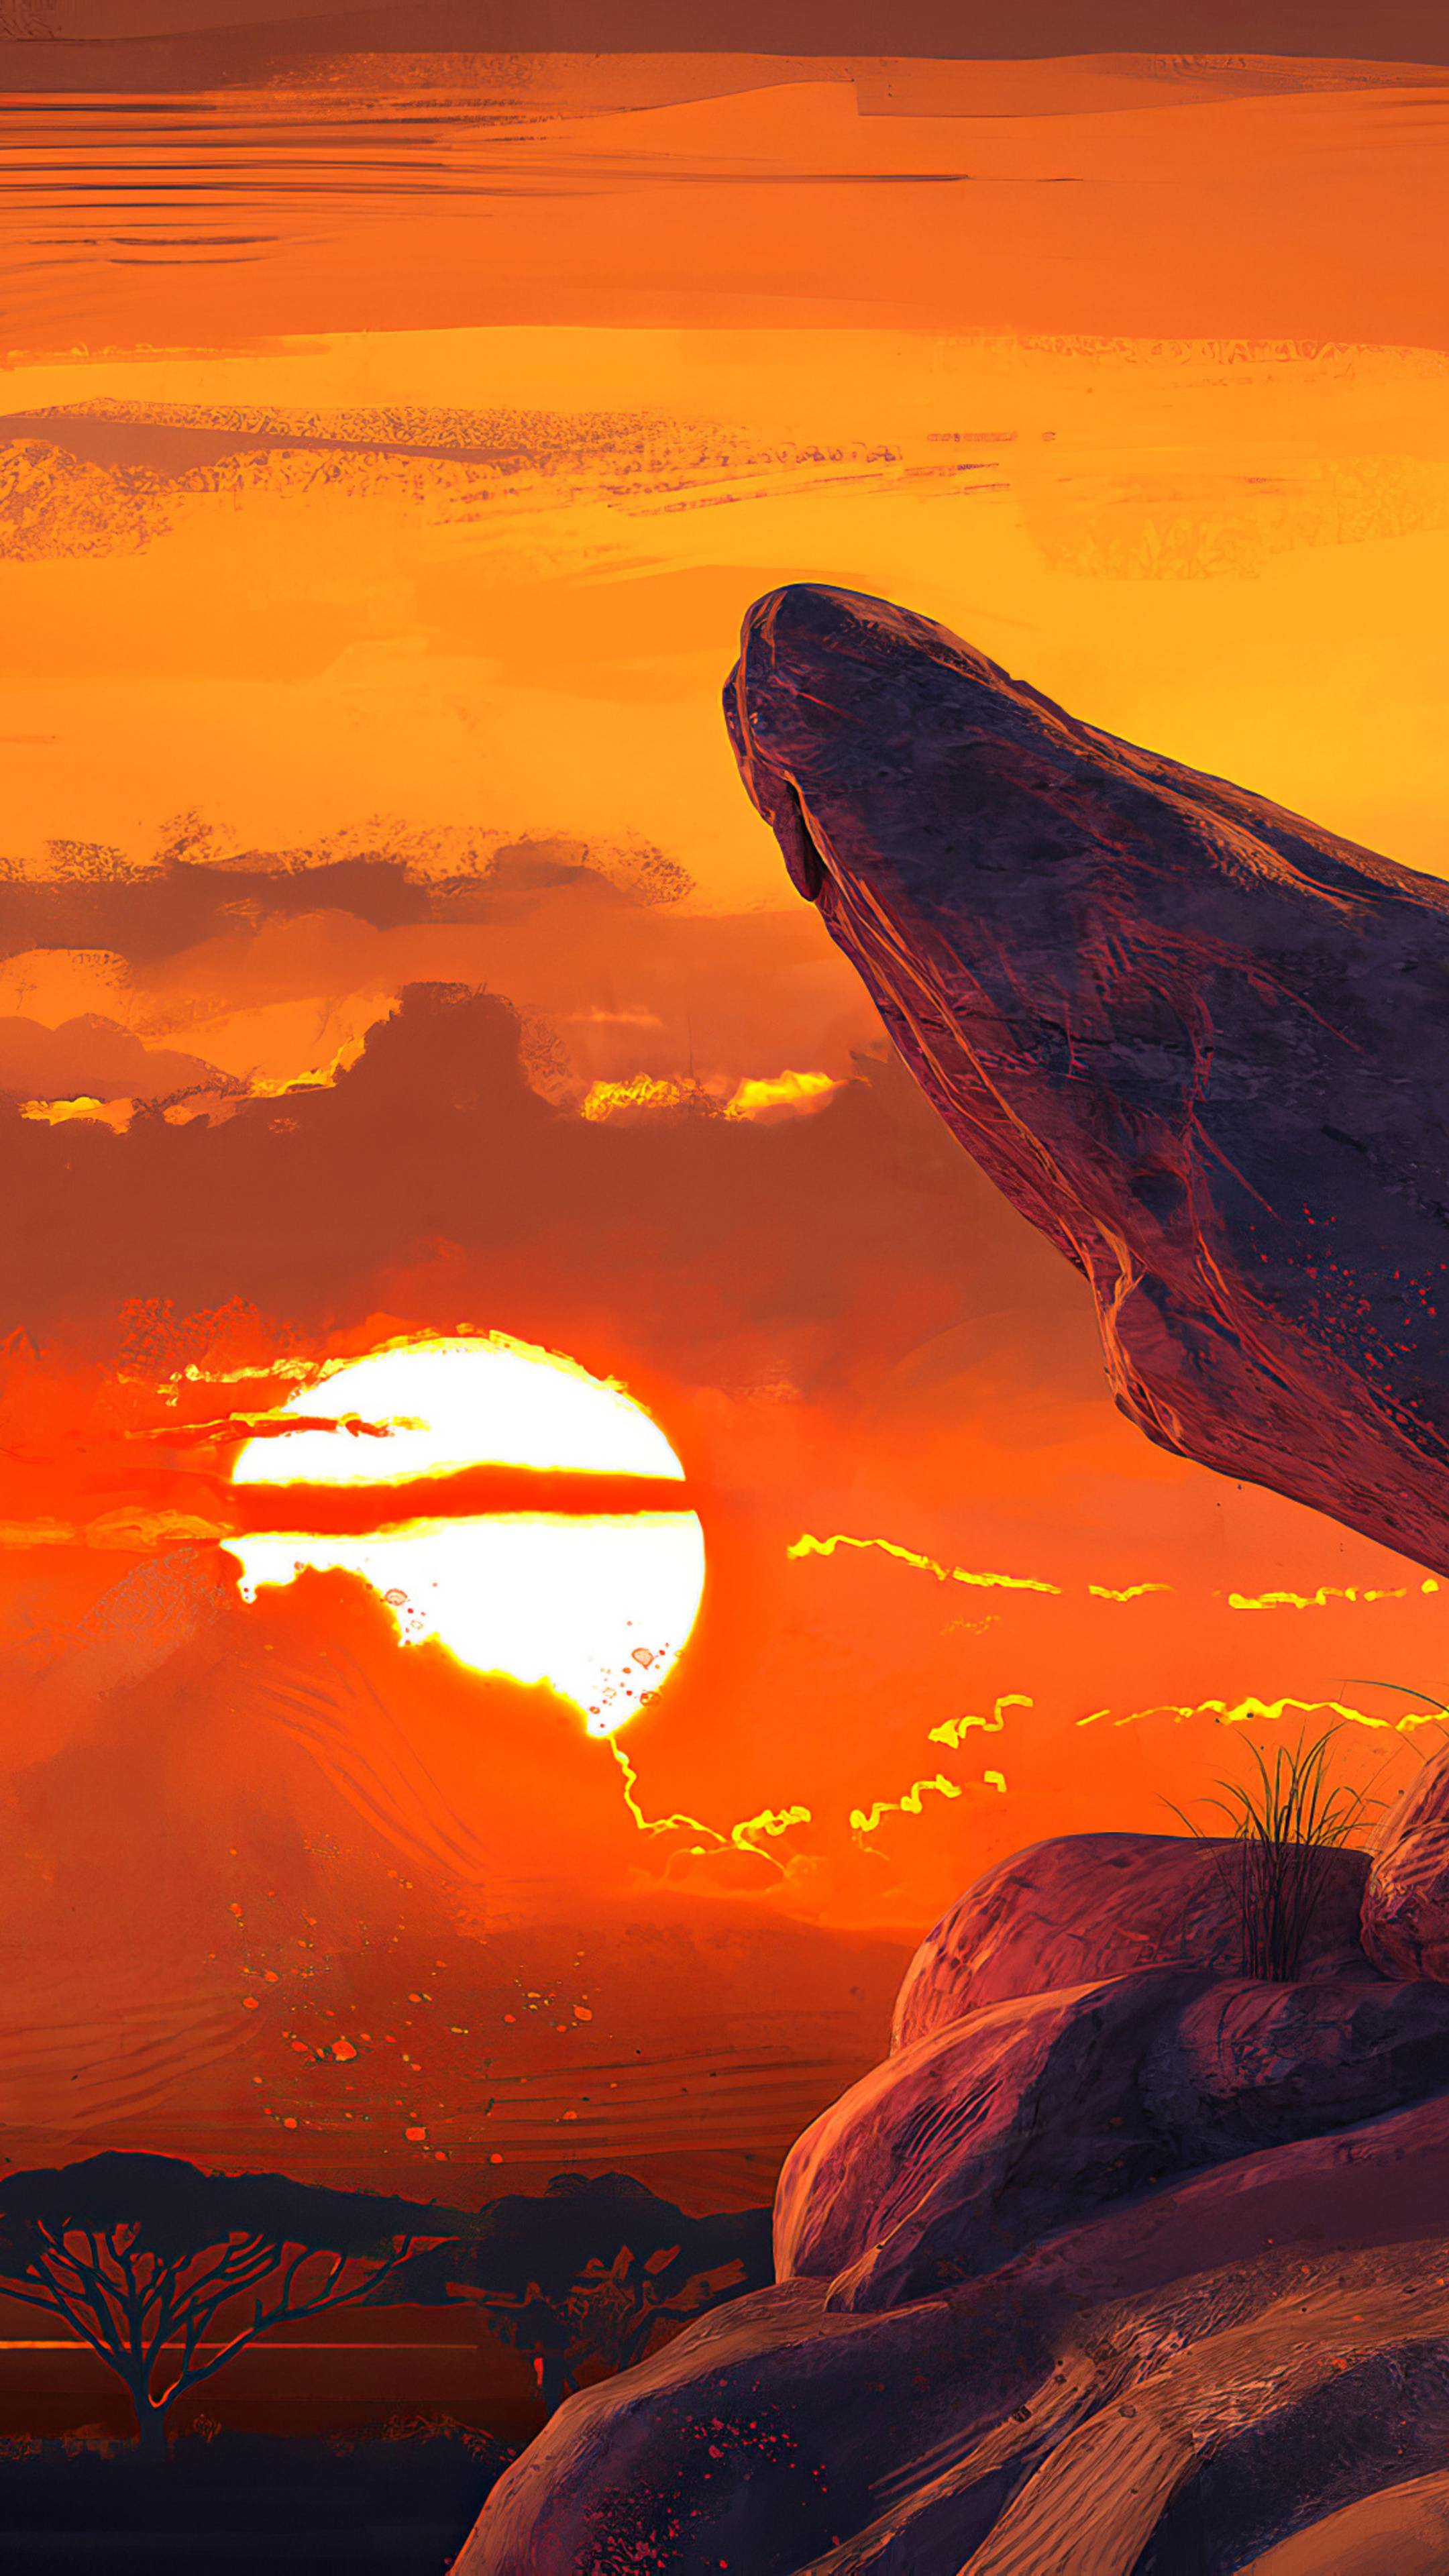 A digital painting of a desert sunset with a large rock in the foreground. - The Lion King